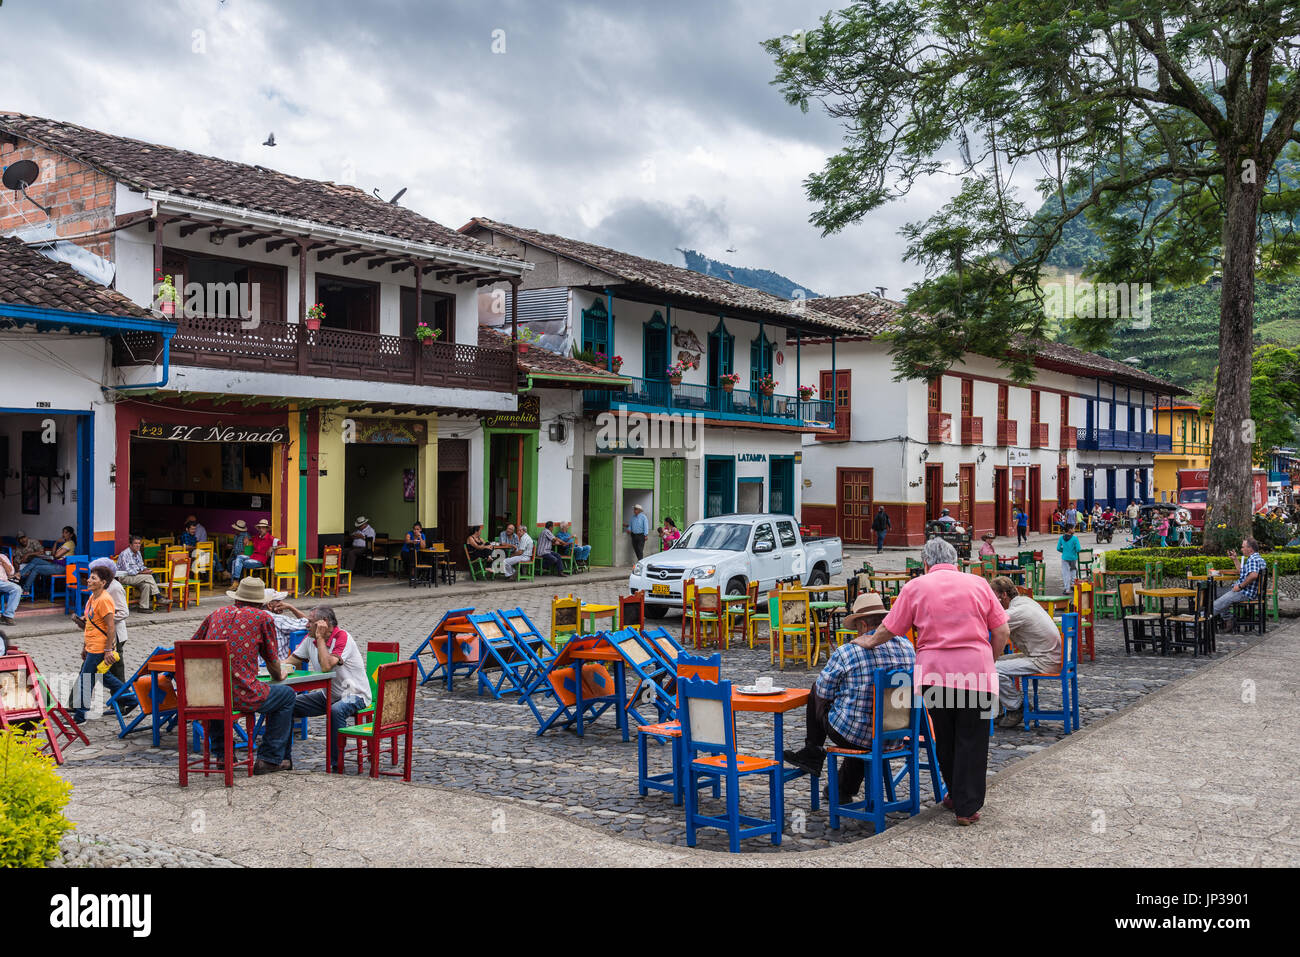 People enjoy the day in historic center of small town Jardin, Colombia, South America Stock Photo